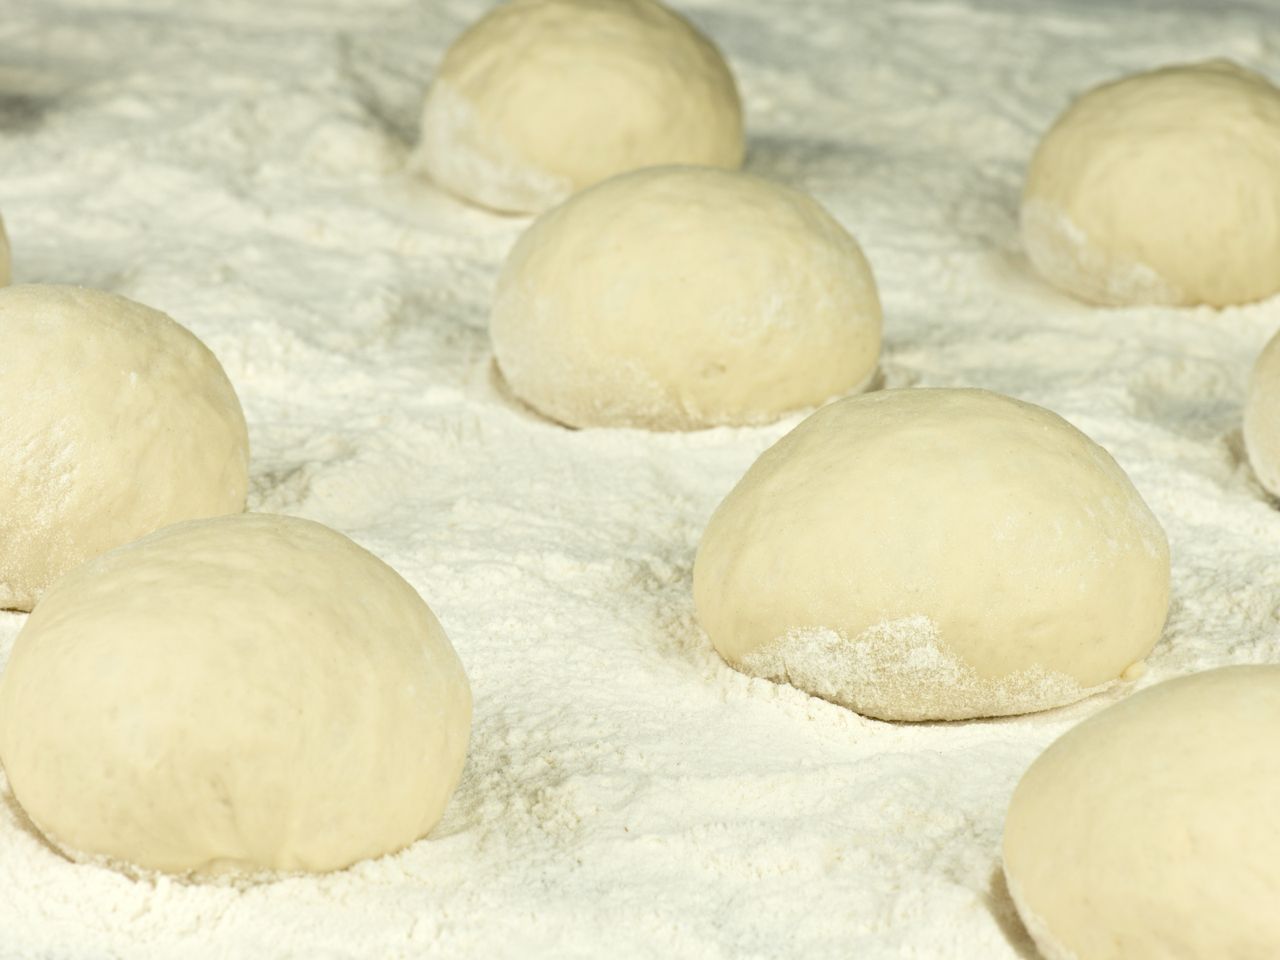 Place the fork on the rising yeast rolls.